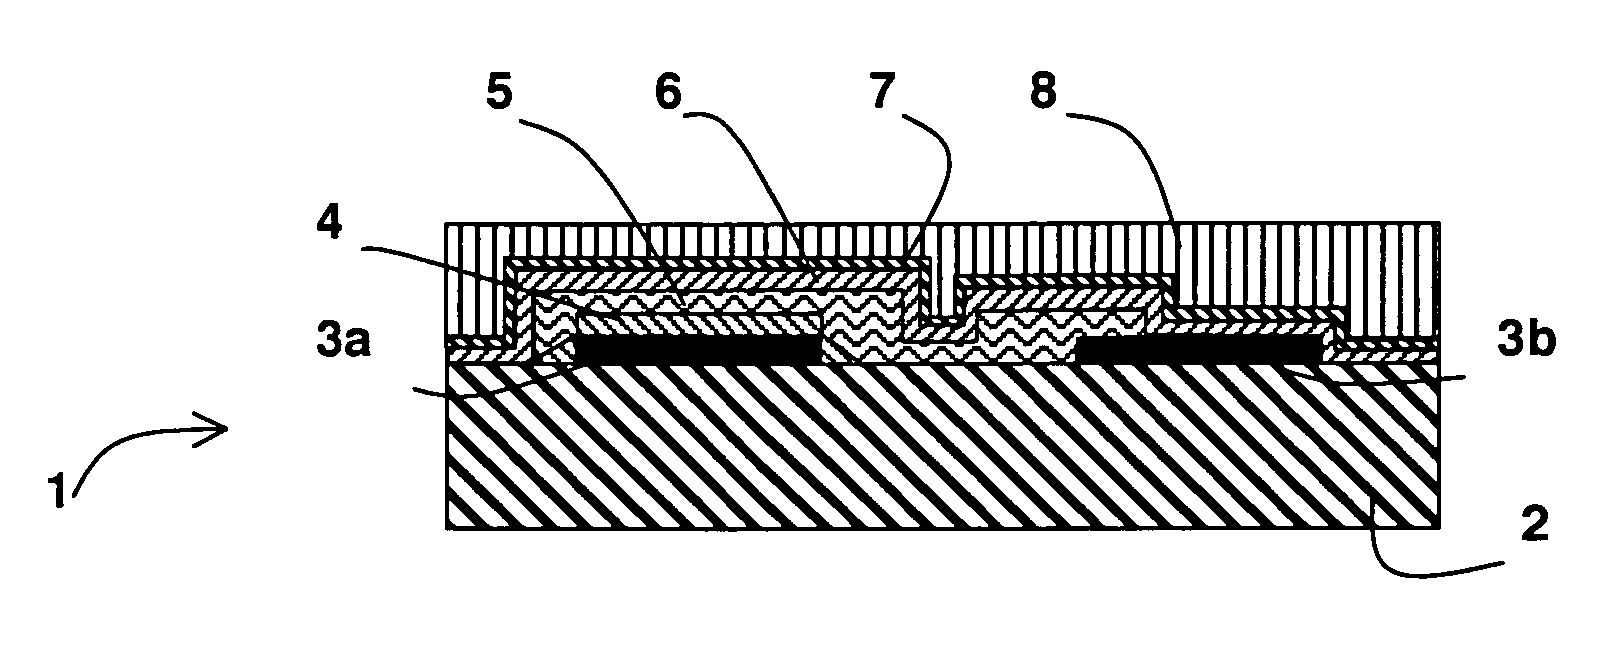 Lithium microbattery provided with a protective envelope, and method for producing one such microbattery